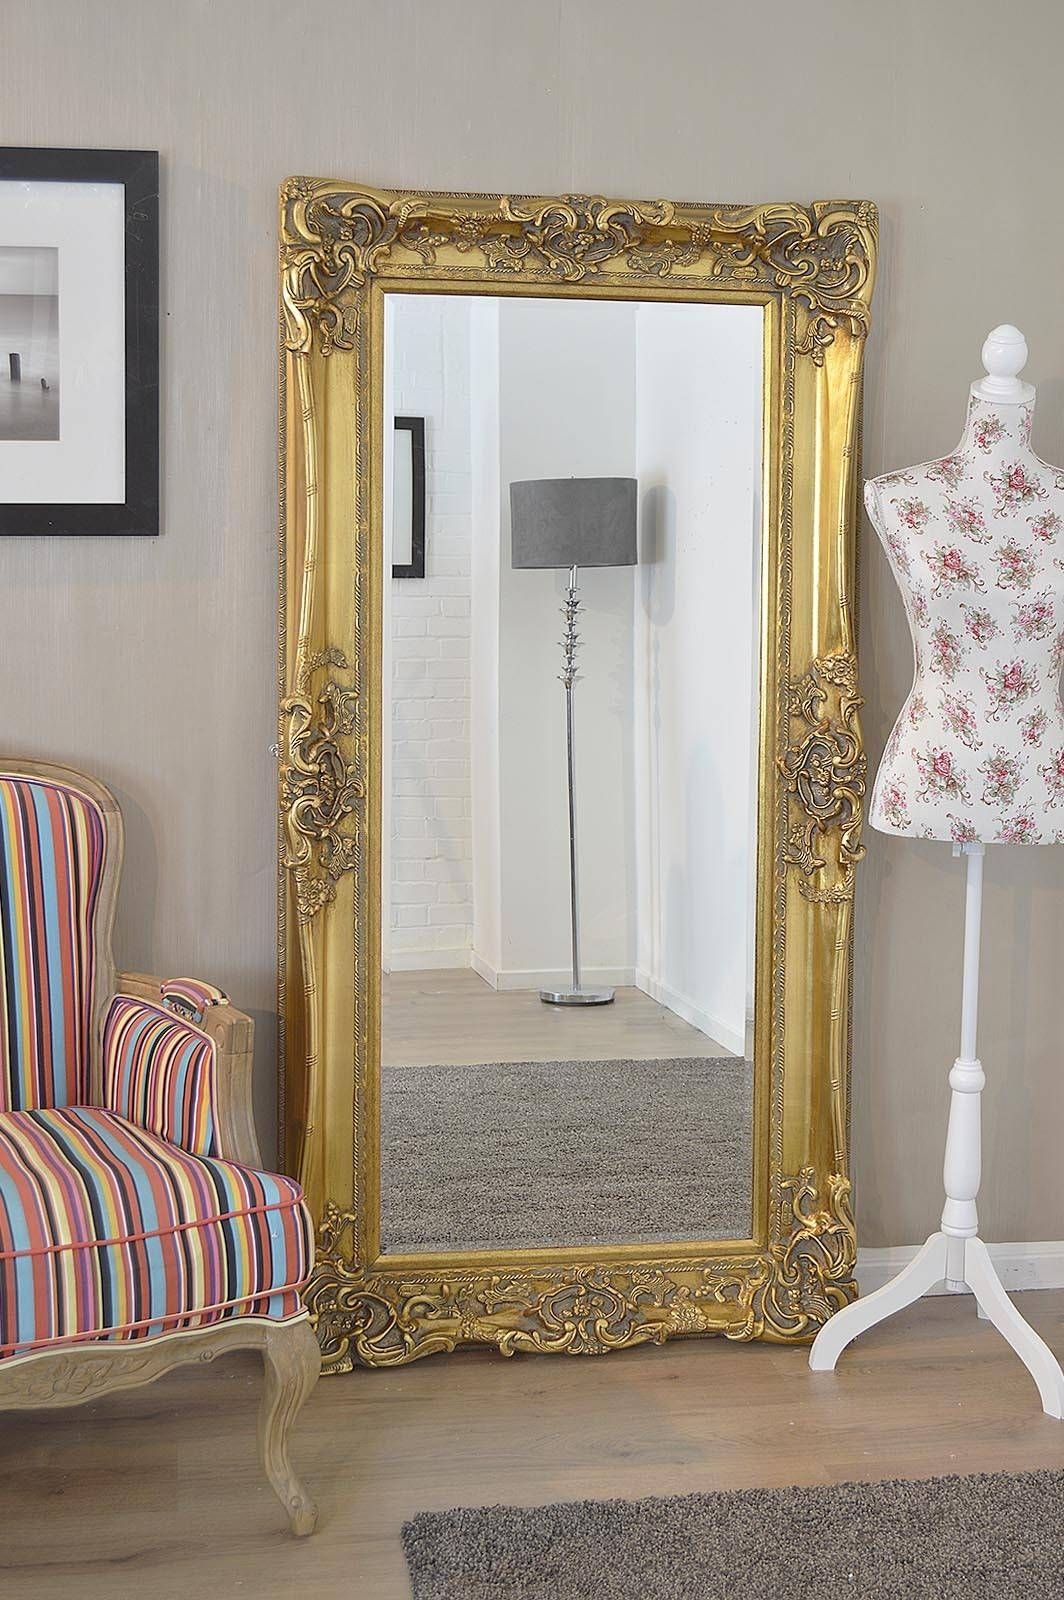 Ornate Mirrors For Sale 125 Awesome Exterior With Large Wall Within Ornate Bathroom Mirrors (View 13 of 25)